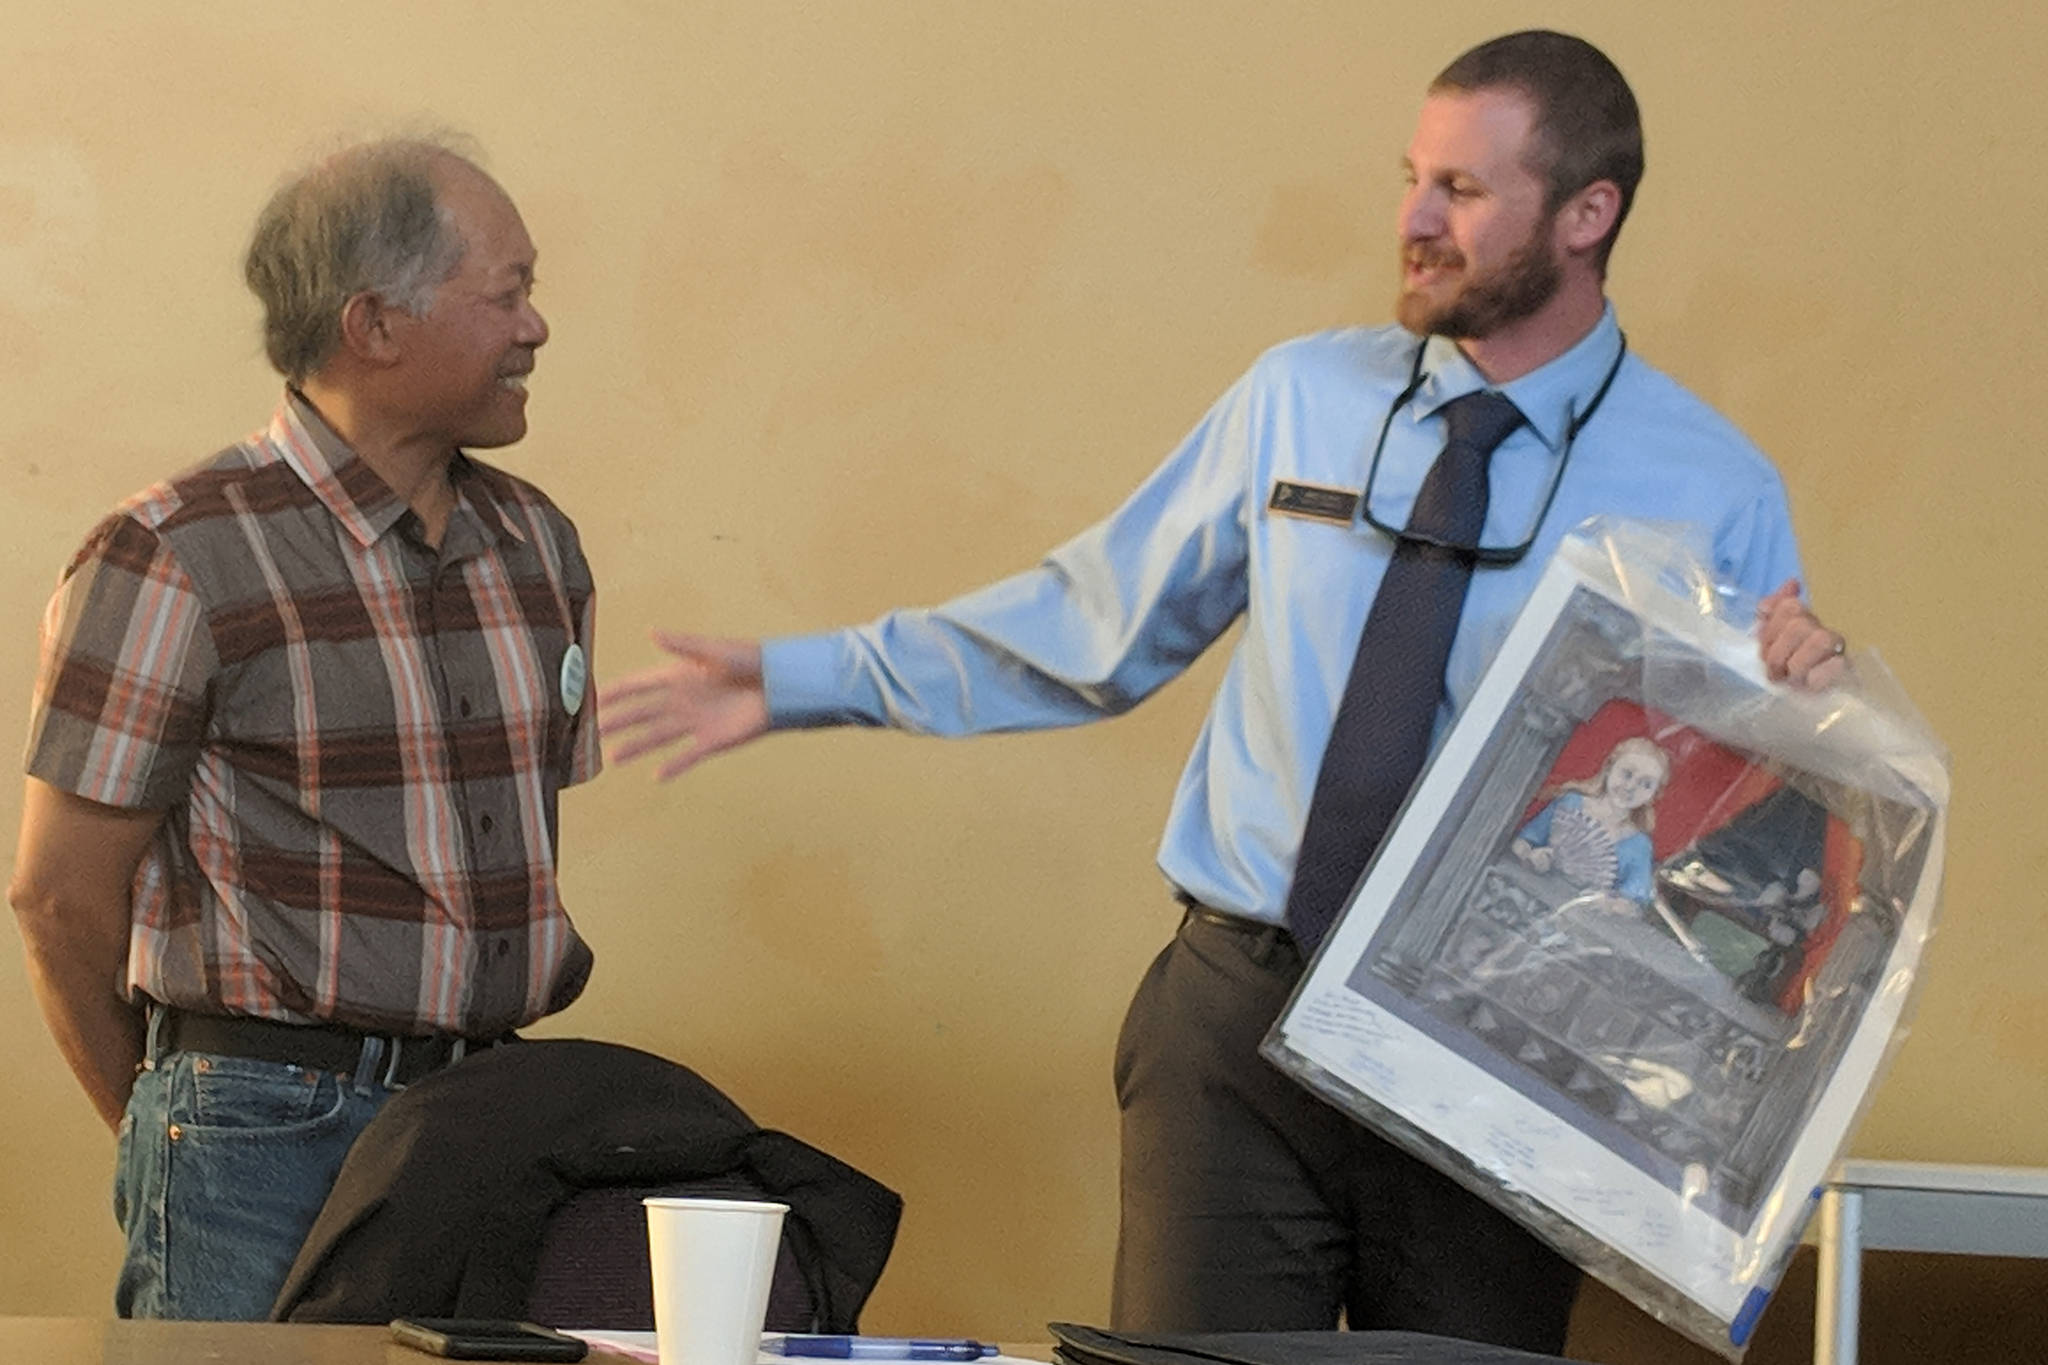 Juneau Arts & Humanities Council Board Vice President Bing Carrillo gifts a piece of art to departing Board President Eric Scott during the JAHC annual meeting. Scott had served as president for three years and said he was feeling loss and melancholy. (Ben Hohenstatt | Capital City Weekly)